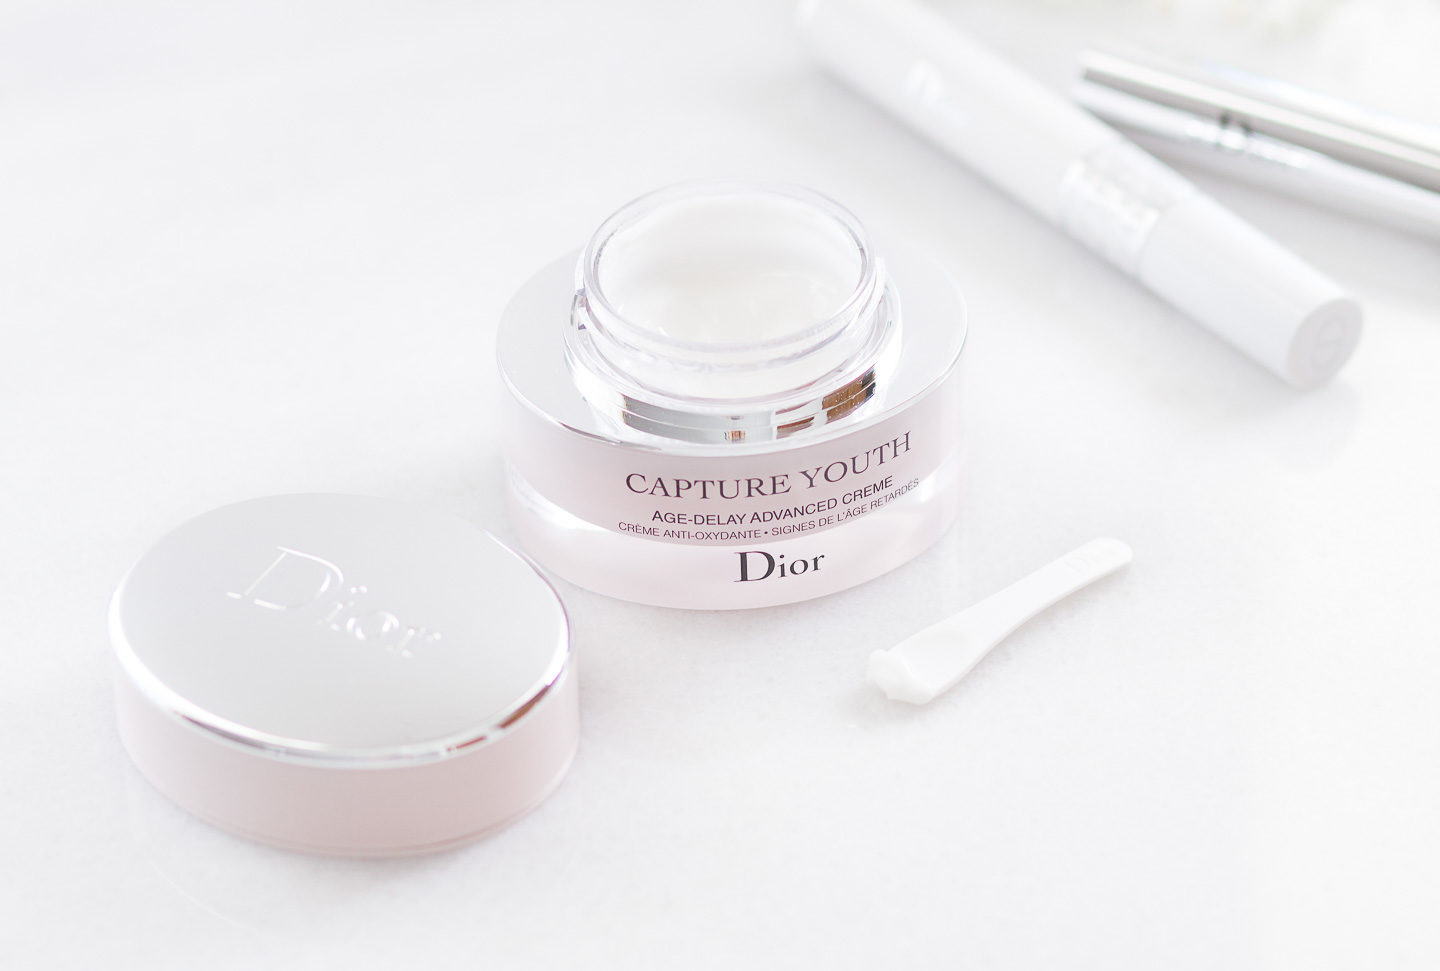 dior-capture-youth-age-delay-creme-review